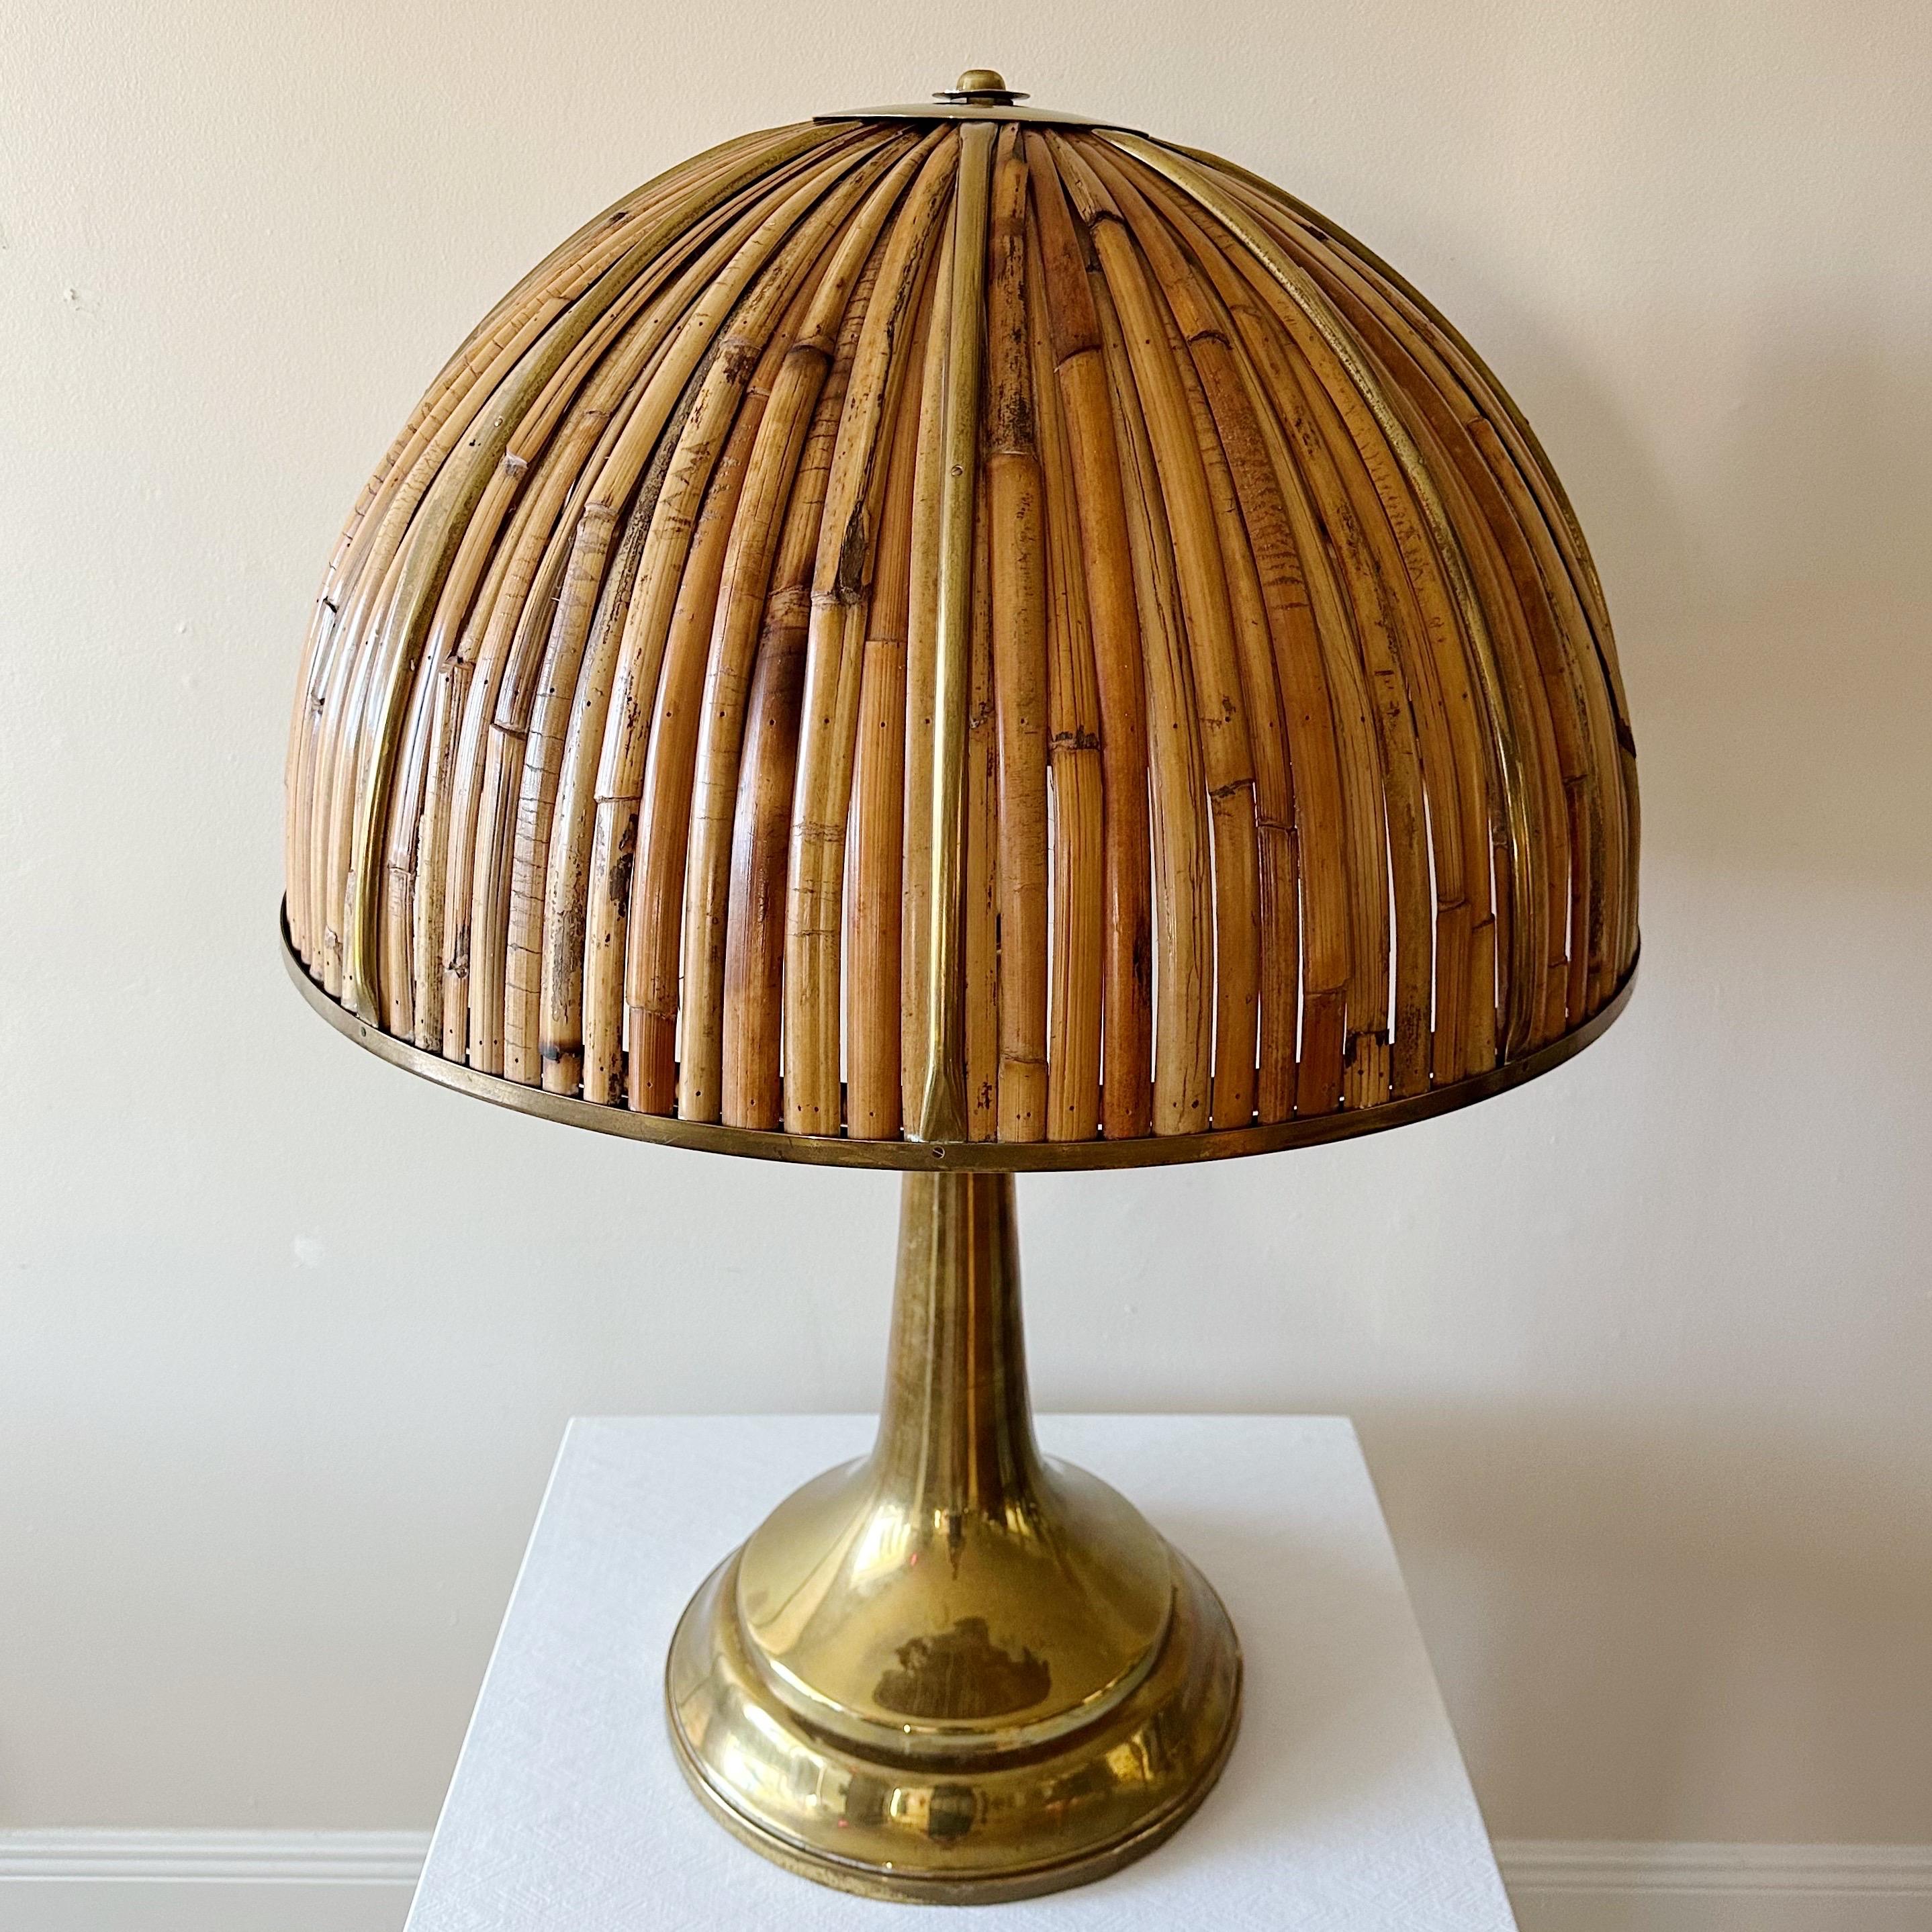 Gabriella Crespi Large Fungo Table Lamp, Rising Sun Series, 1973, Italy For Sale 6